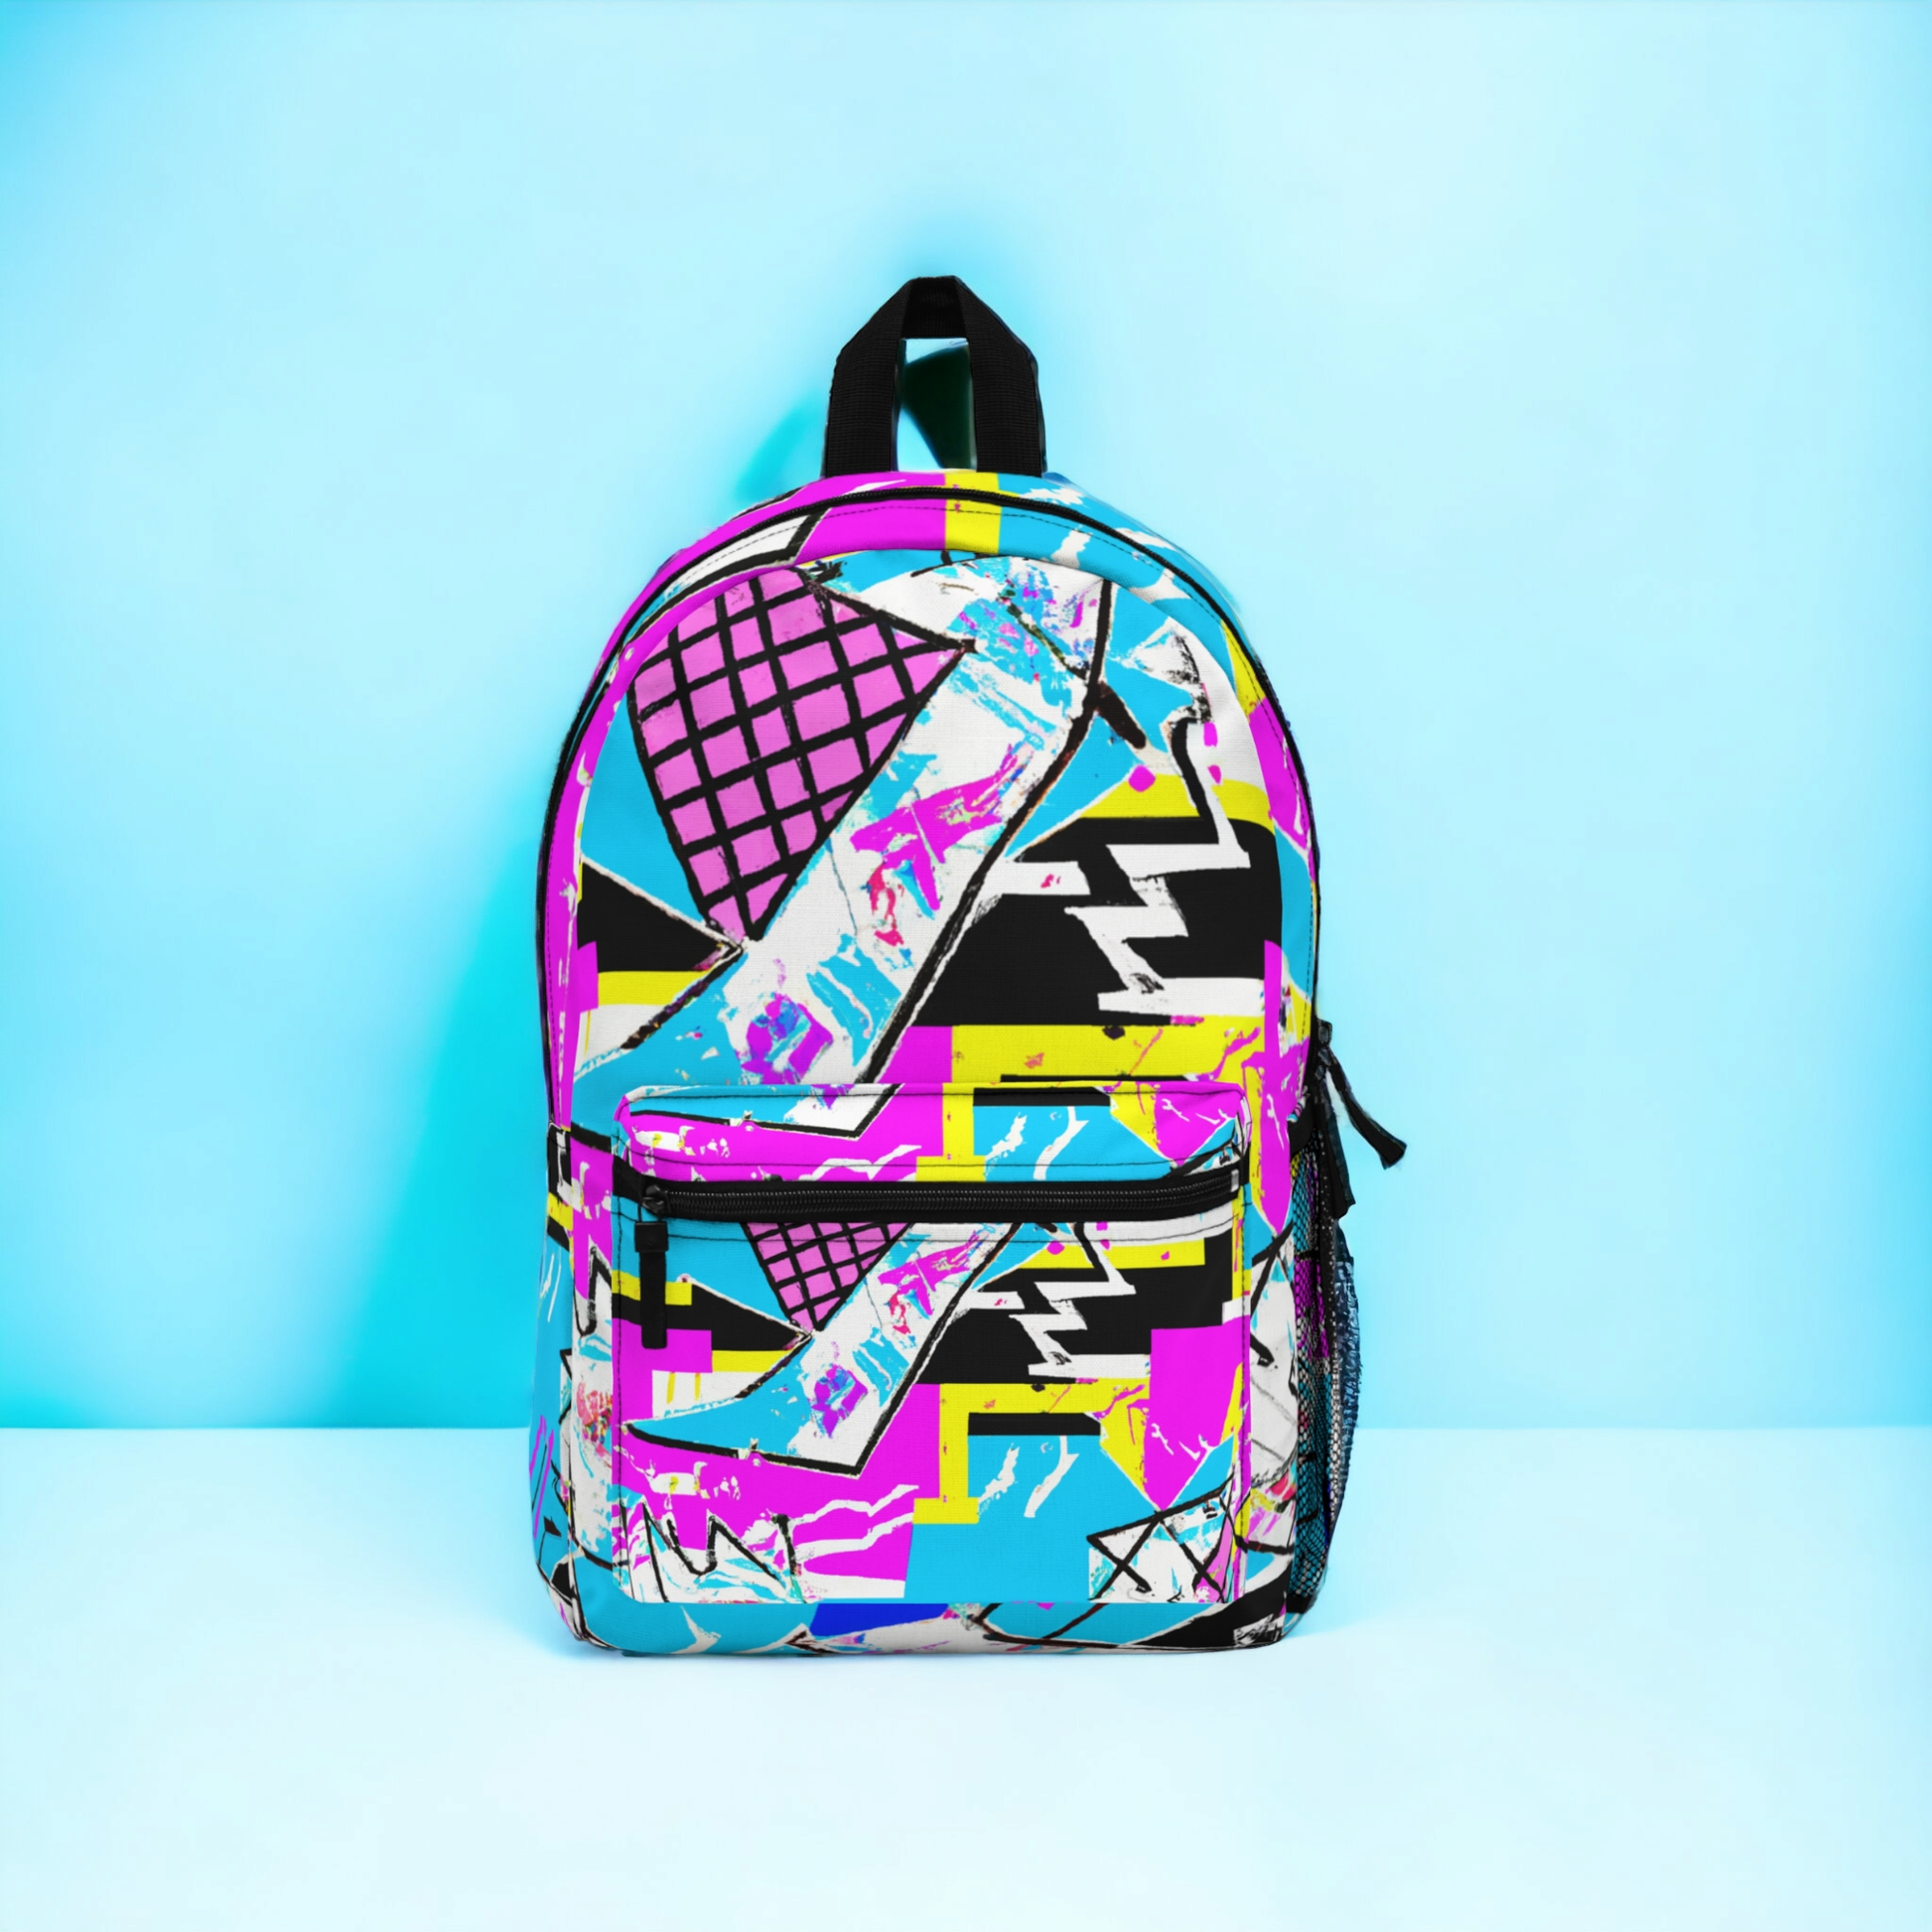 GraffitiScribe: The Edgy Canvas Graffiti Bookbag for School, Travel, Urban Art Lovers, and Trendsetters Bags Bigger Than Life One size  